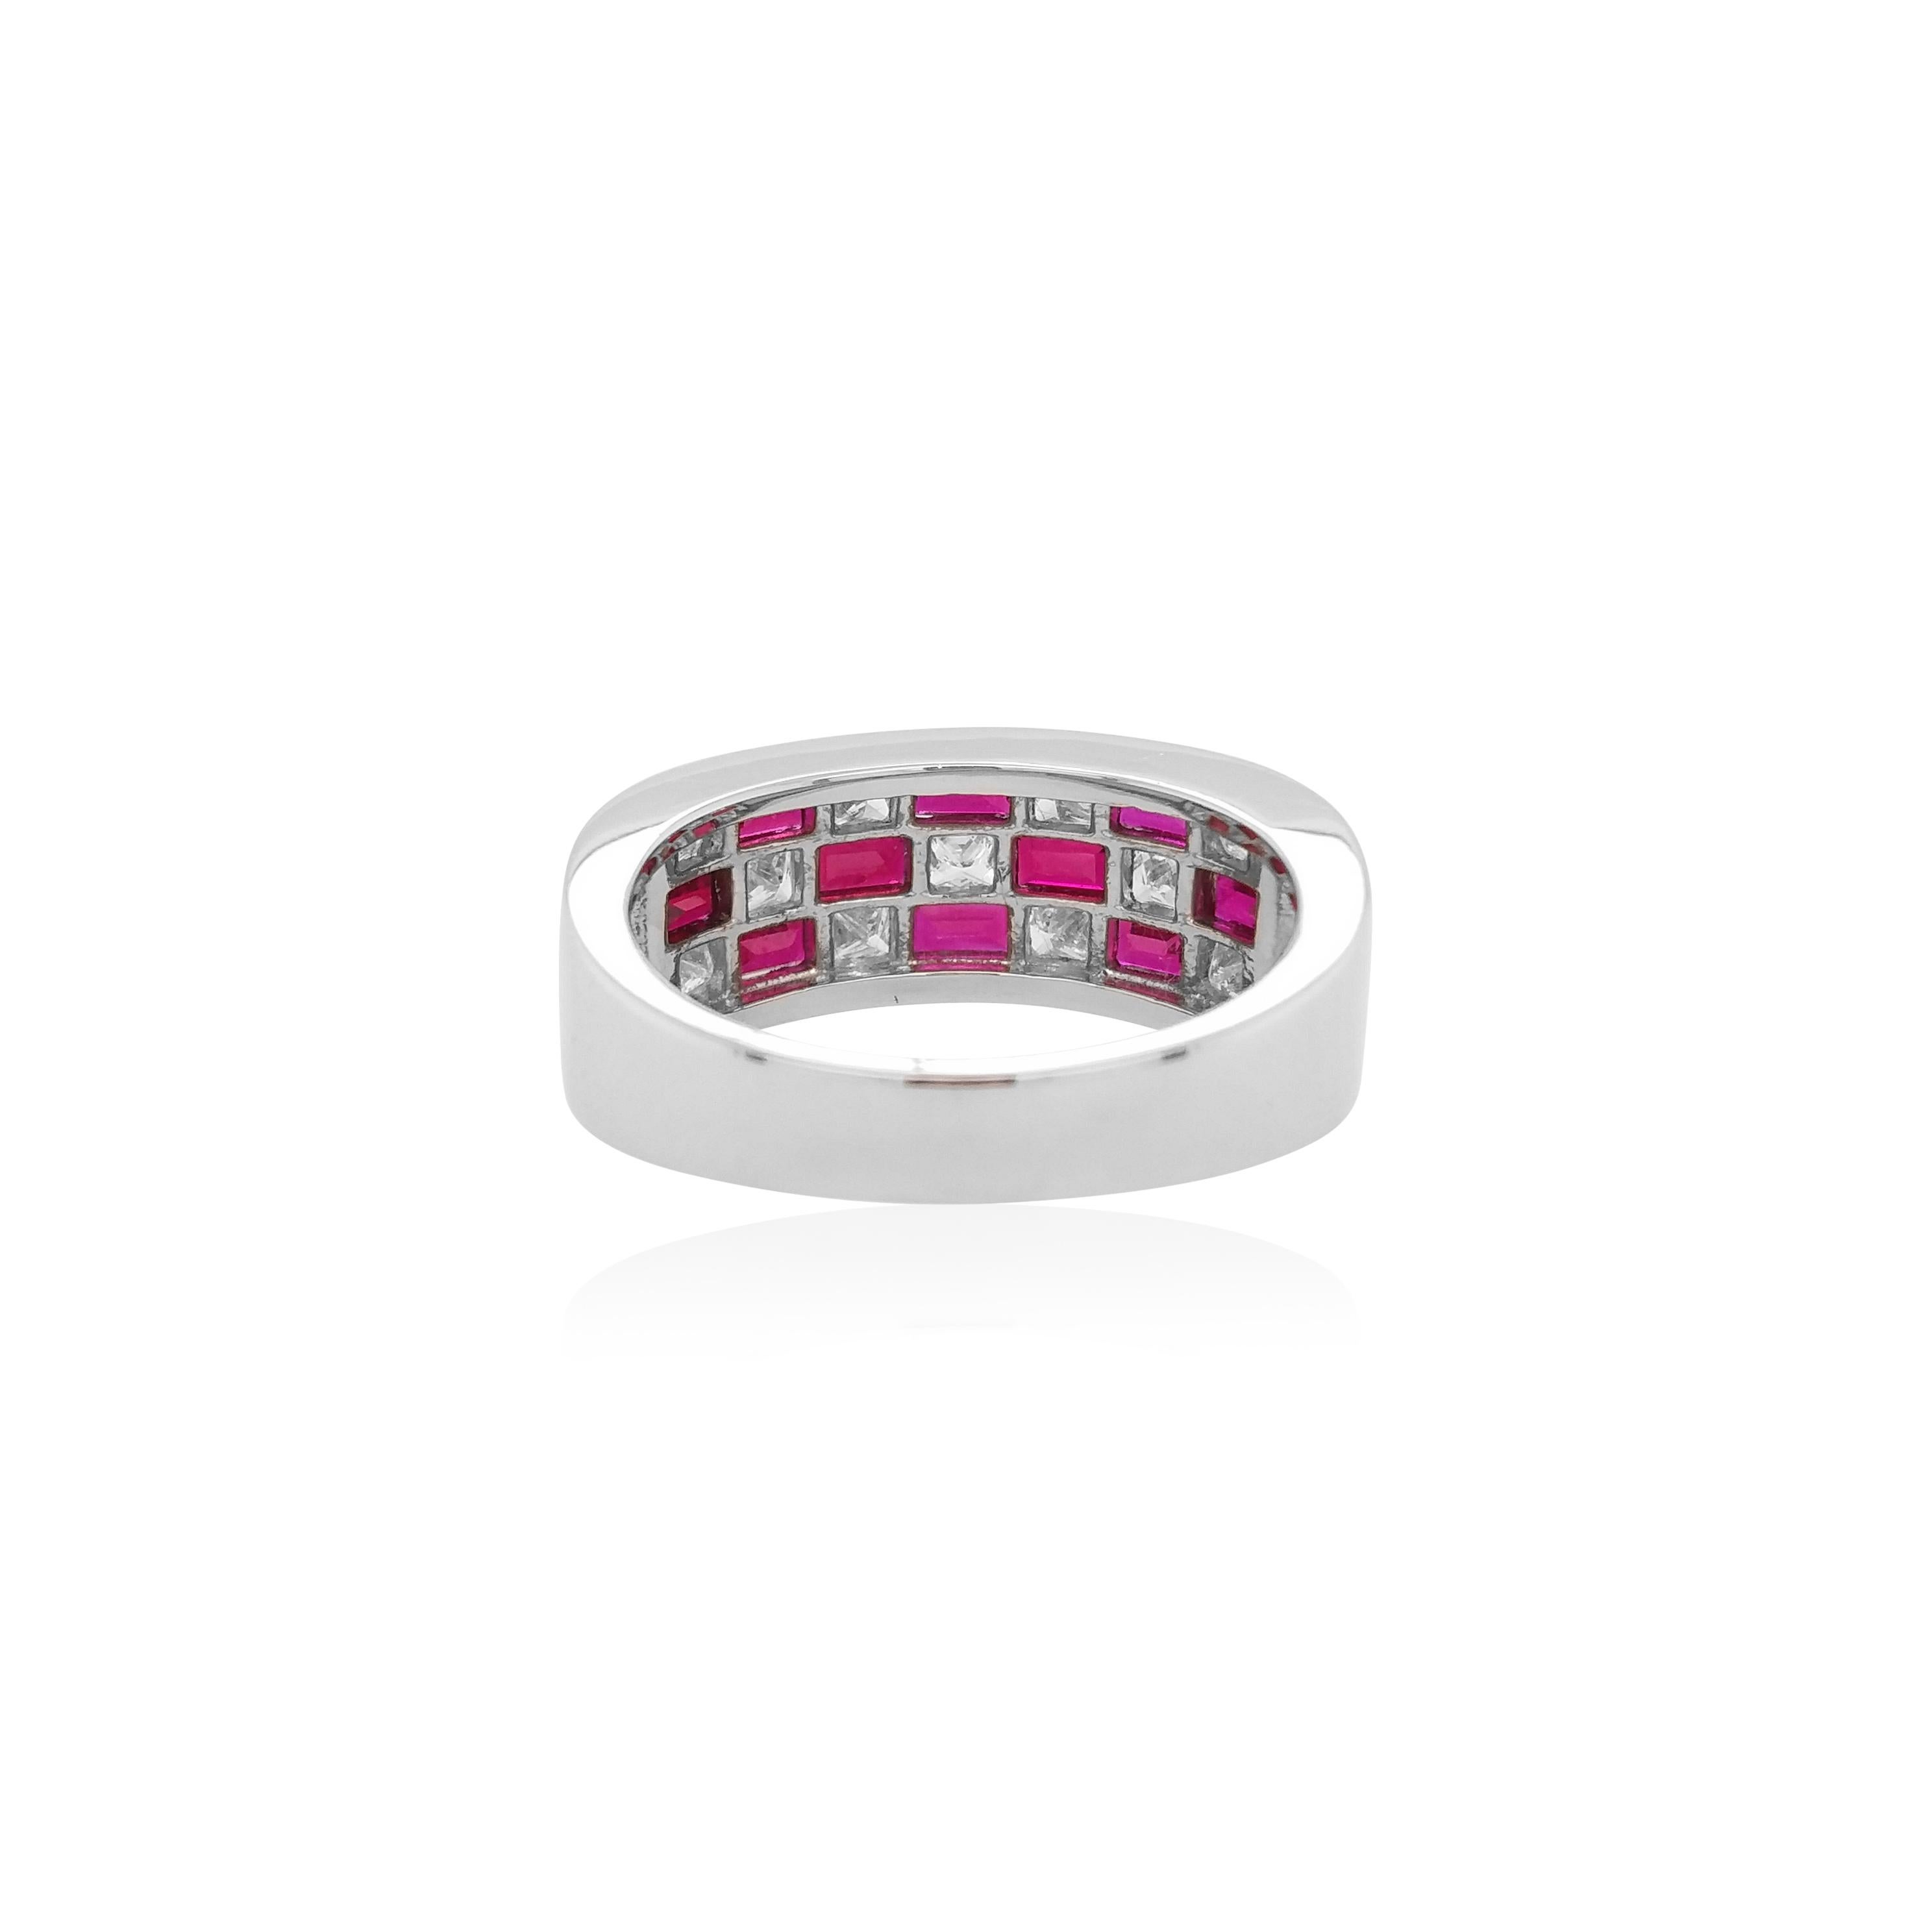 This striking platinum band ring features exceptional quality natural no-heat treated Rubies set amongst scintillating sparkling White Diamonds at its front. Set in platinum to provide a unique, but elegant contrast to the colour of the rubies and